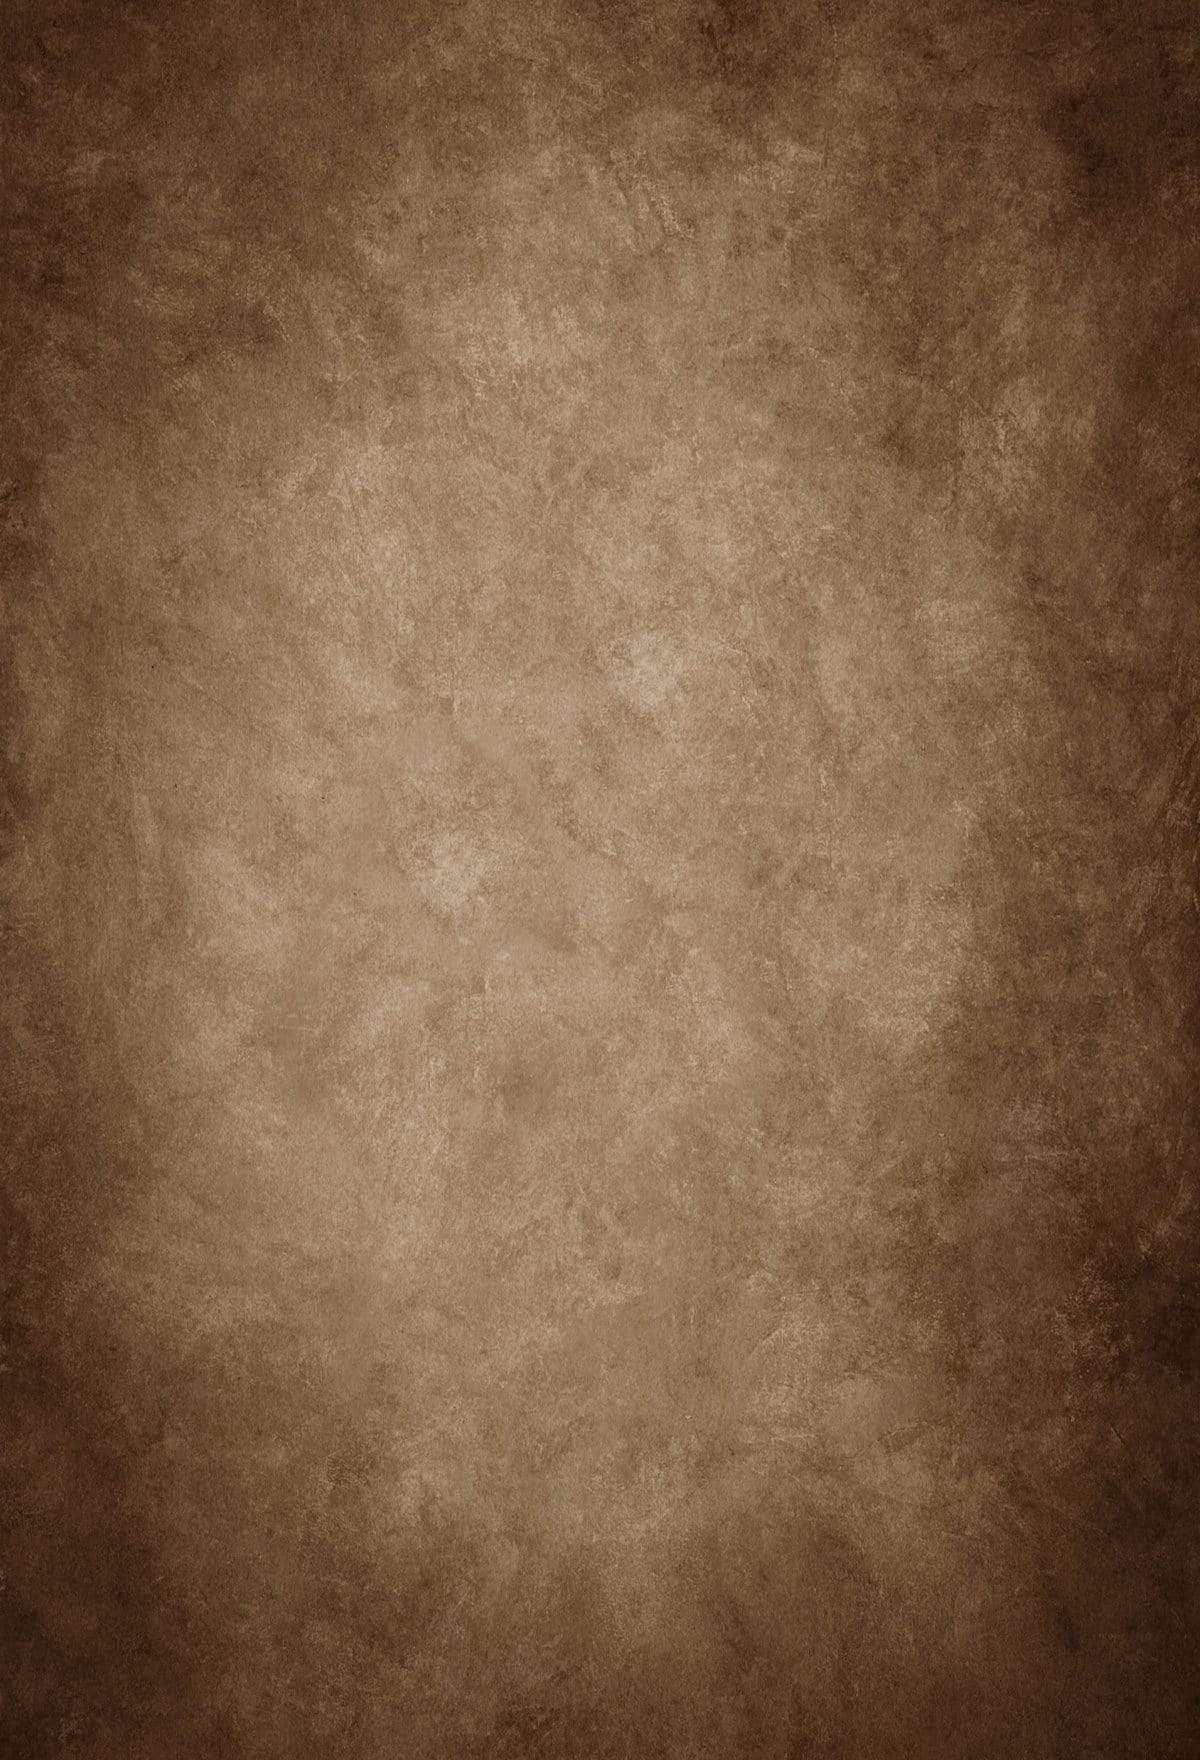 Katebackdrop£ºKate Old Master Abstract Texture Dark Brown Backdrop for Photography